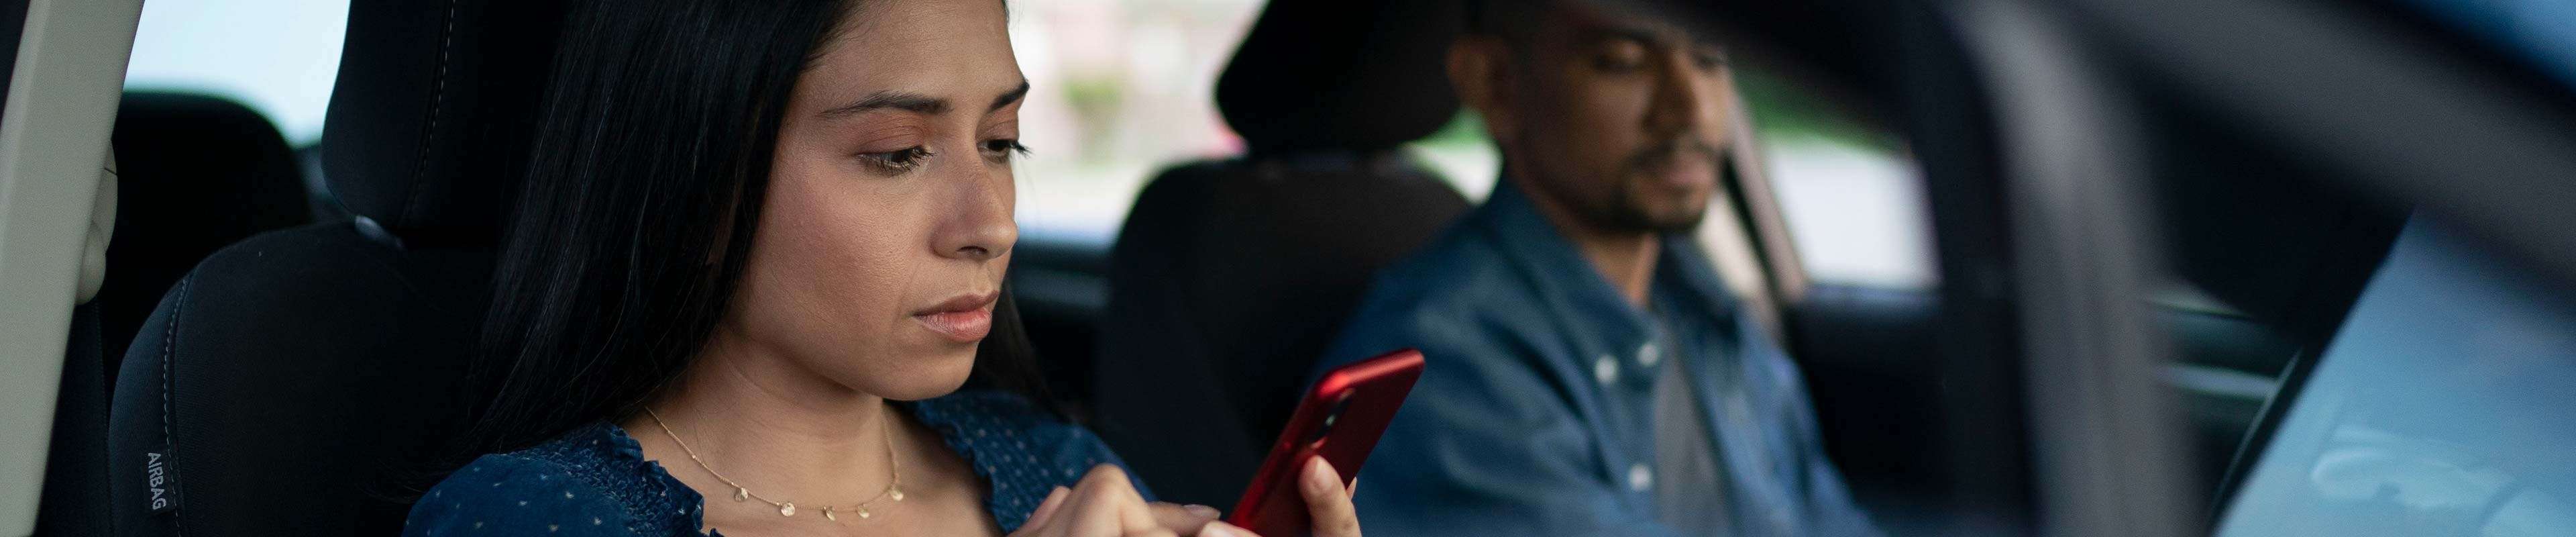 Lady looking at her phone buckled up in the front Passenger seat Web